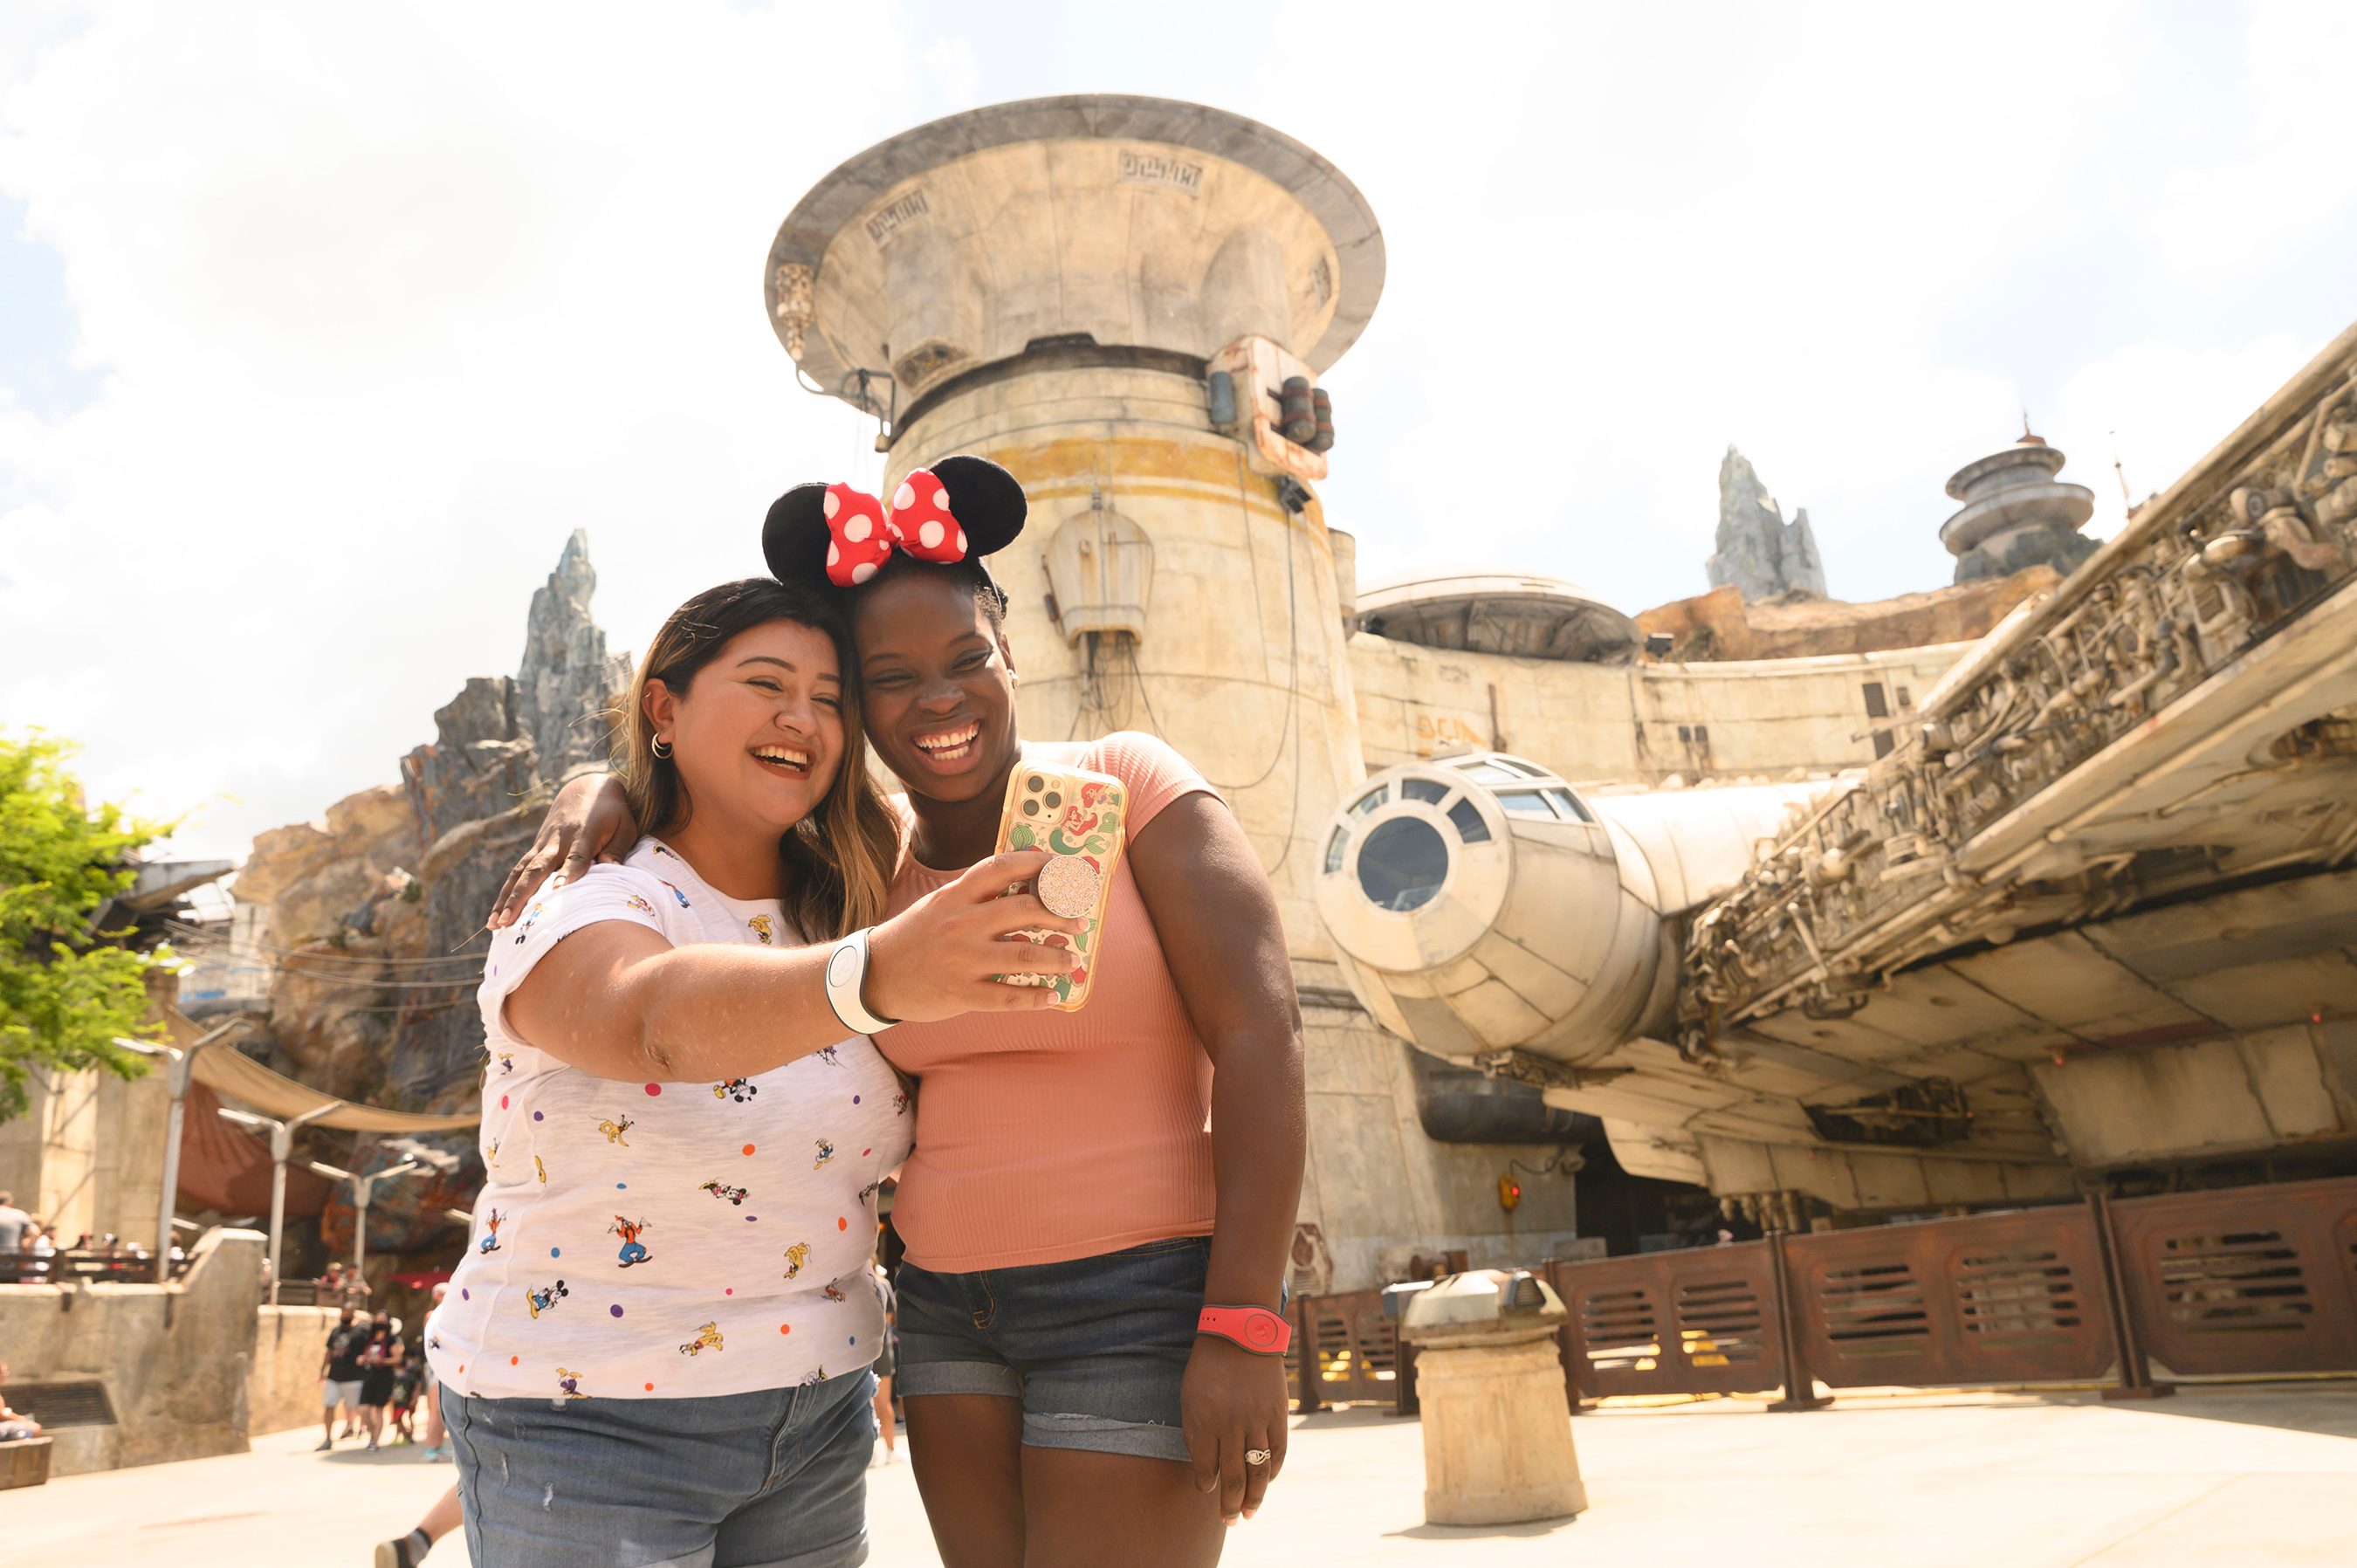 This special offer at Walt Disney World will get you two